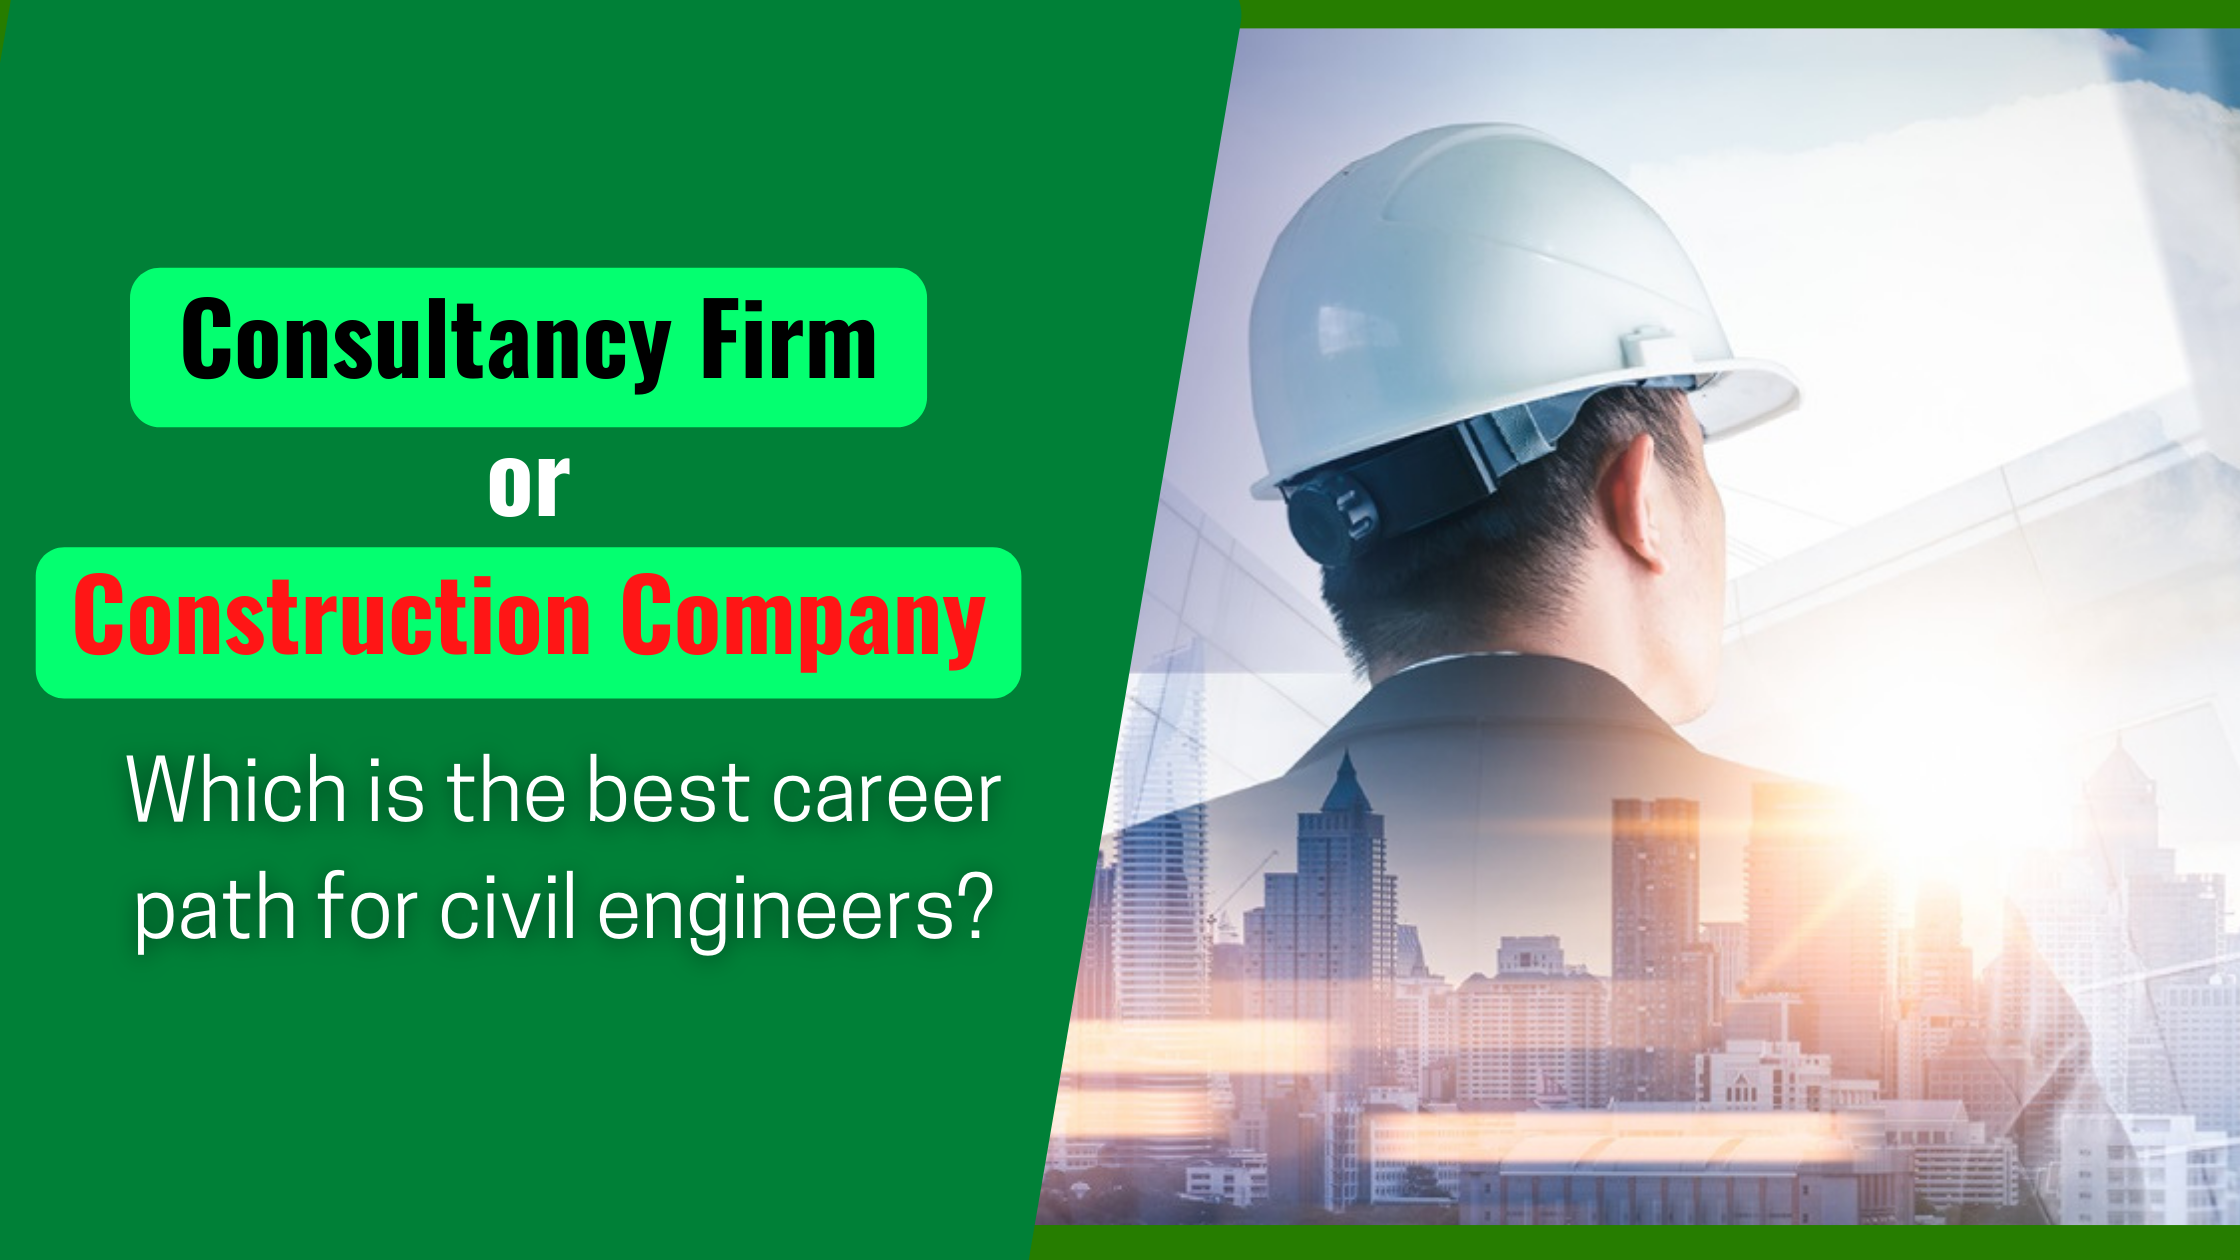 Consultancy firm or Construction Company: Which is the best career path